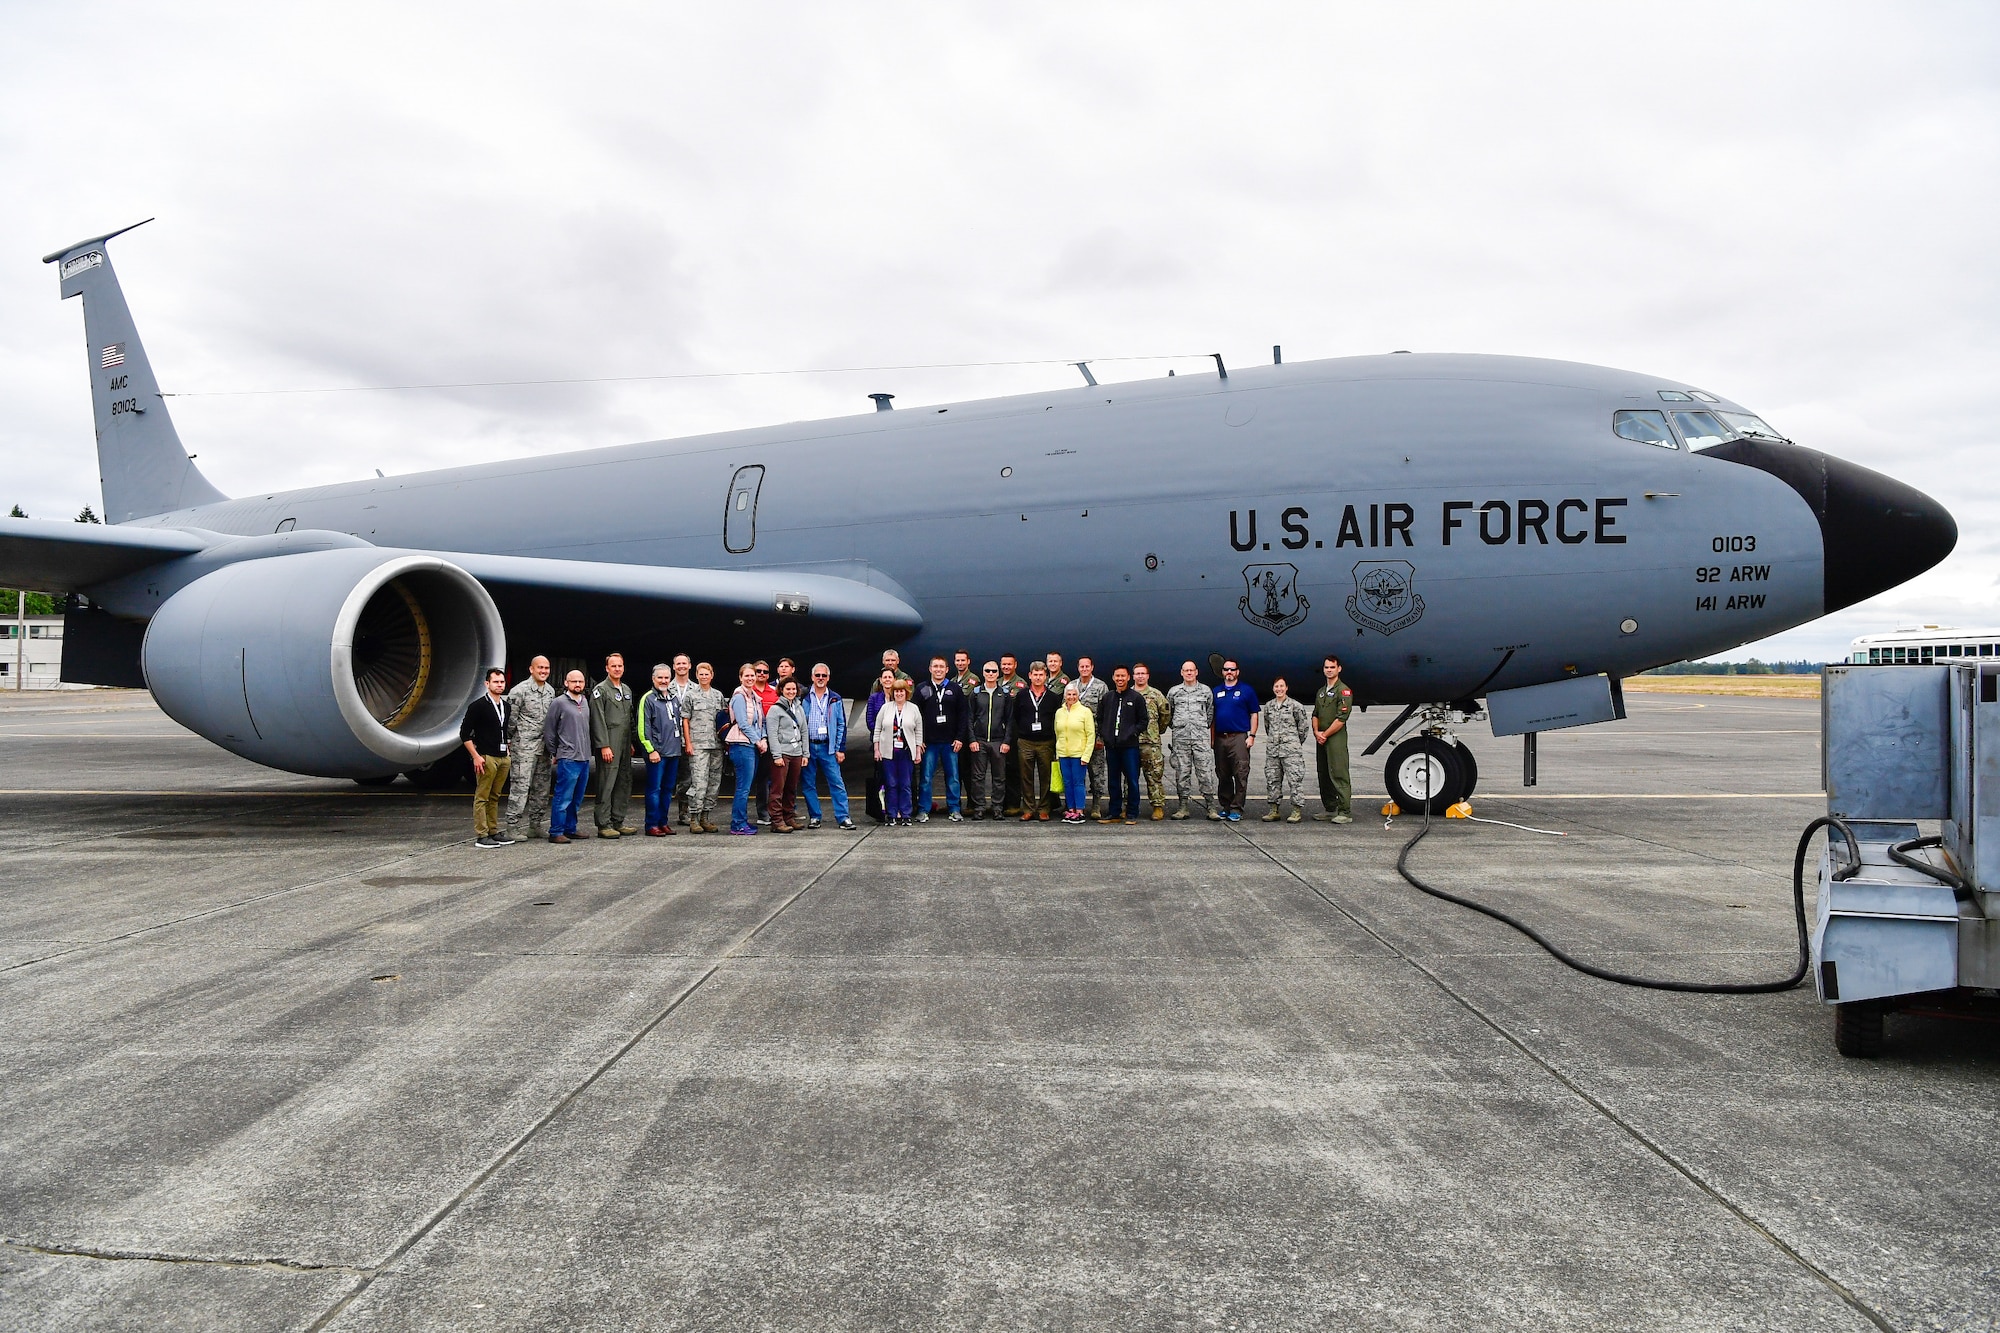 As part of the Employer Support of the Guard and Reserve (ESGR) Bosslift program, the Washington Air National Guard's 141st Air Refueling Wing flew civilian employers on KC-135s where they witnessed F-15s from the 142nd Fighter Wing, Oregon Air National Guard, being refueled June 7, 2018. (U.S. Air National Guard photo by Capt. Colette Muller)